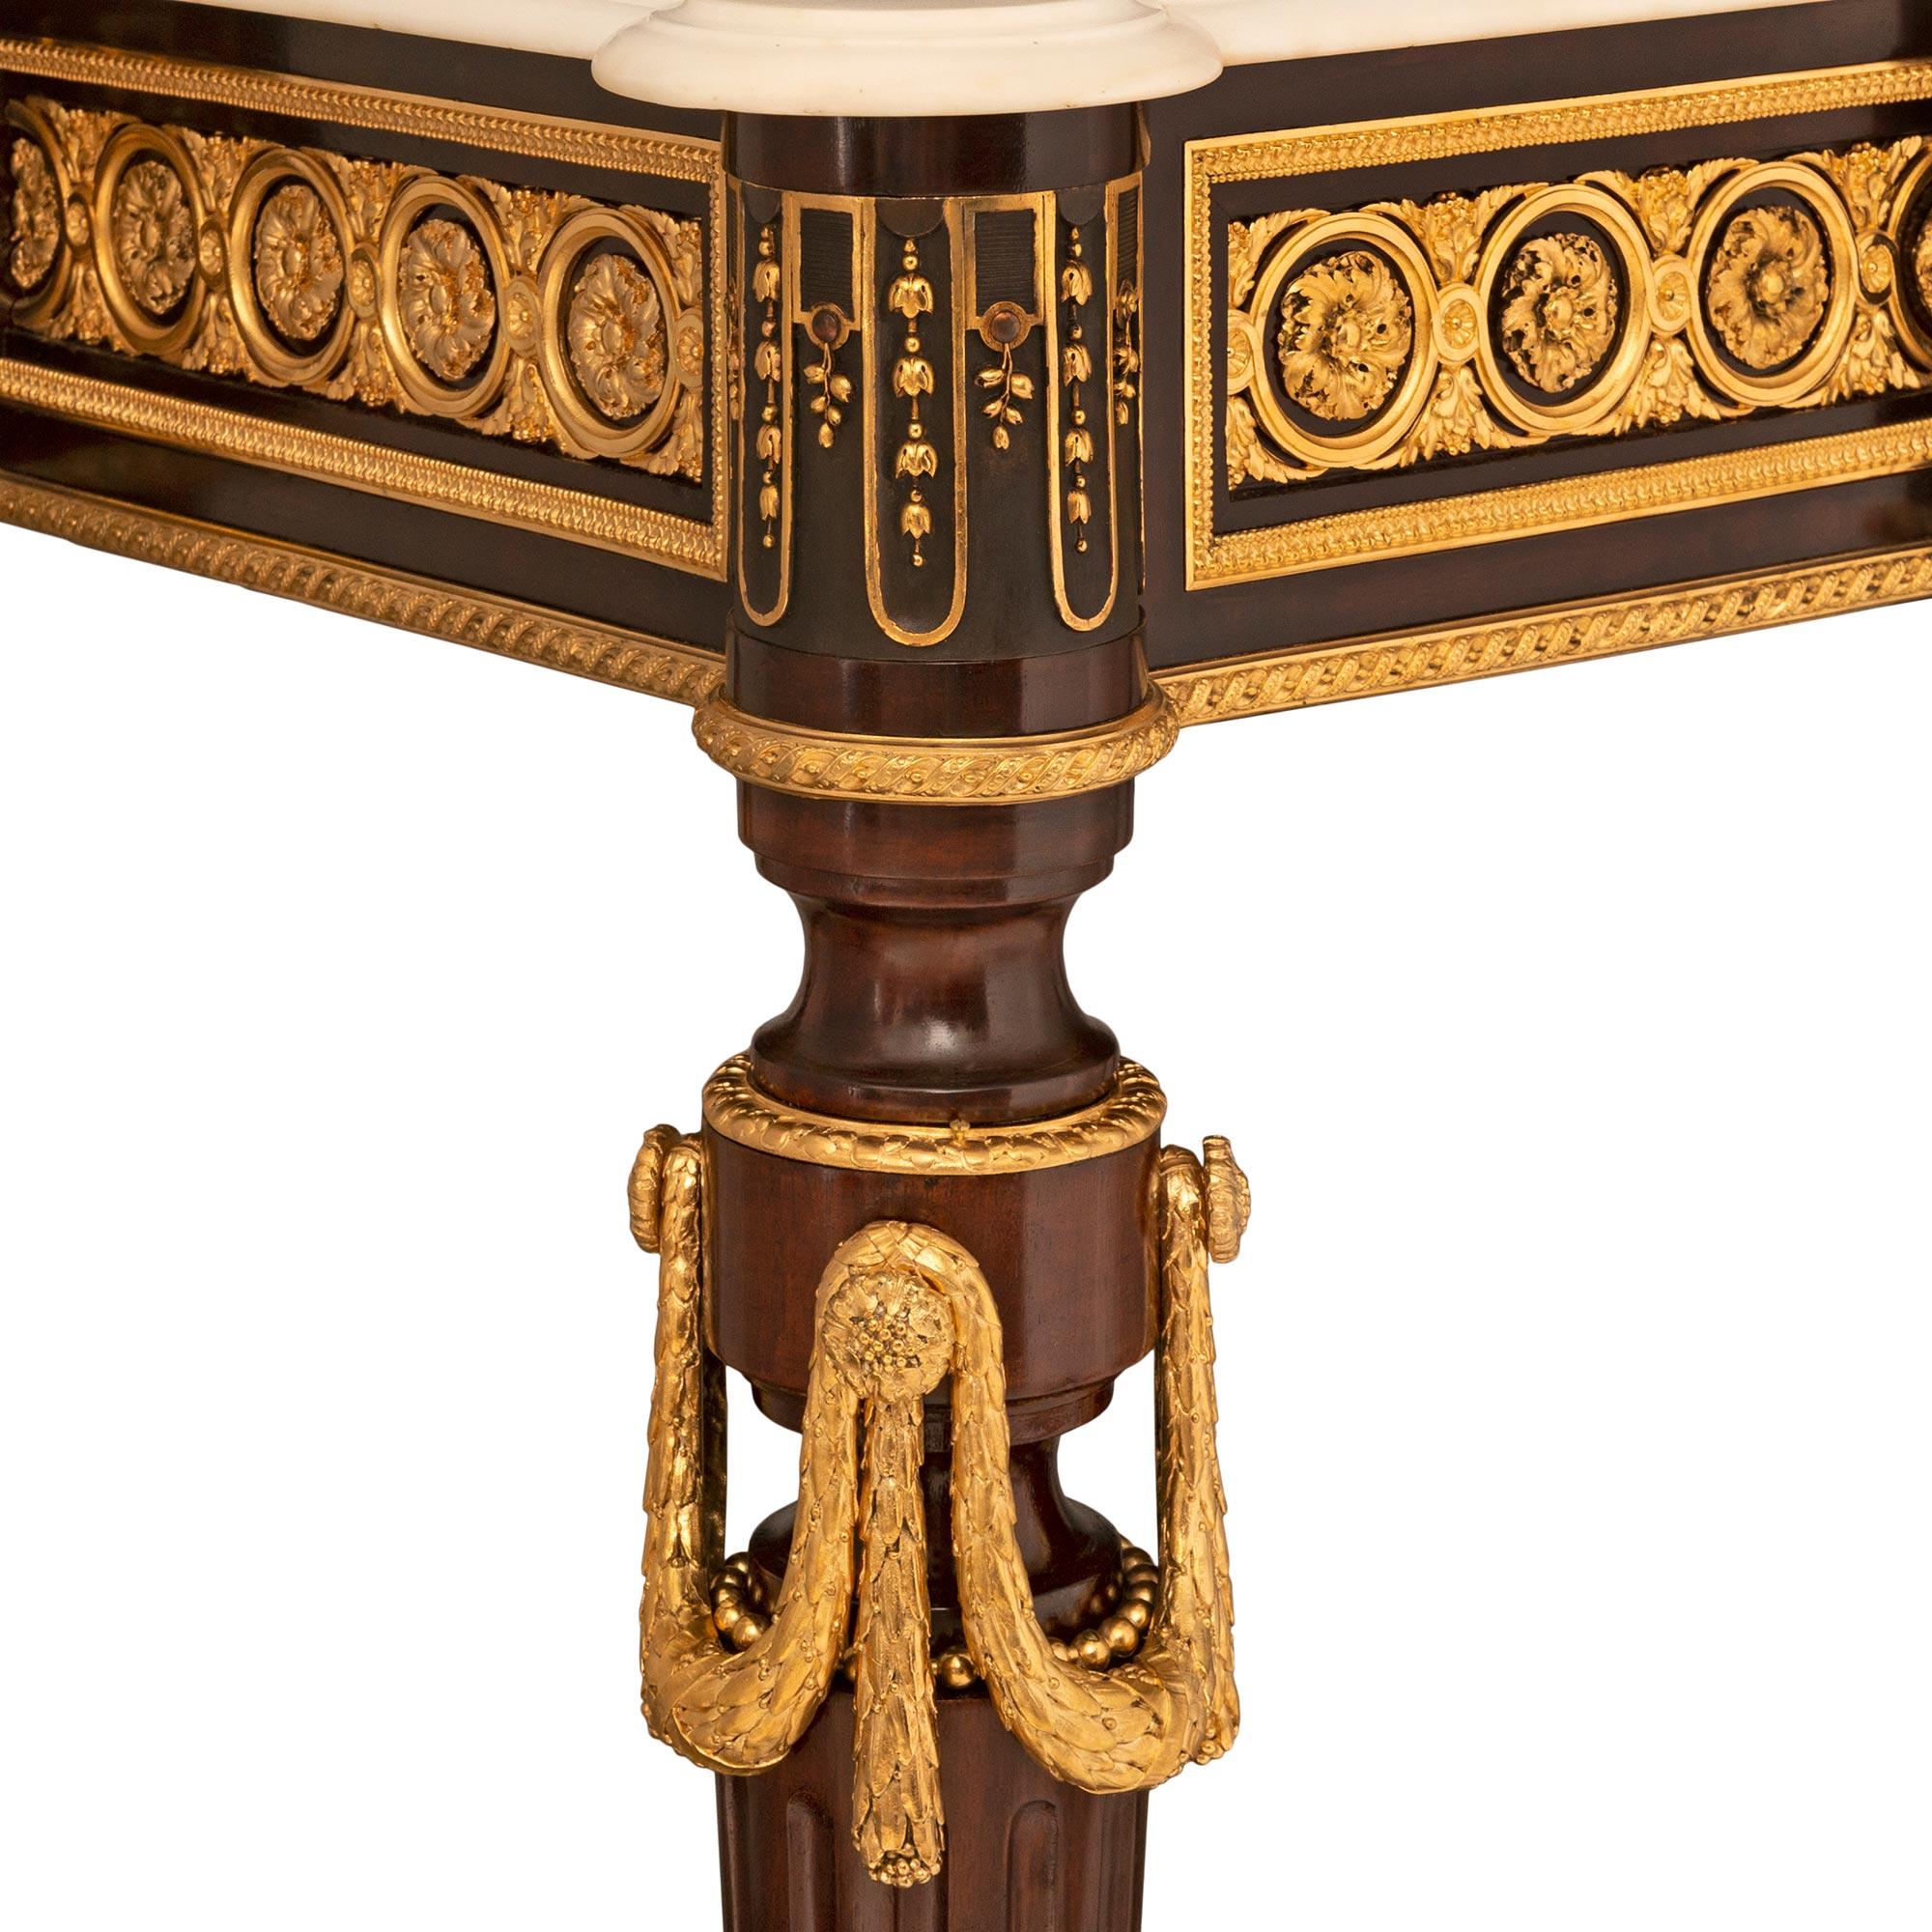 French 19th Century Napoleon III Period Mahogany, Ormolu and Marble Console In Good Condition For Sale In West Palm Beach, FL